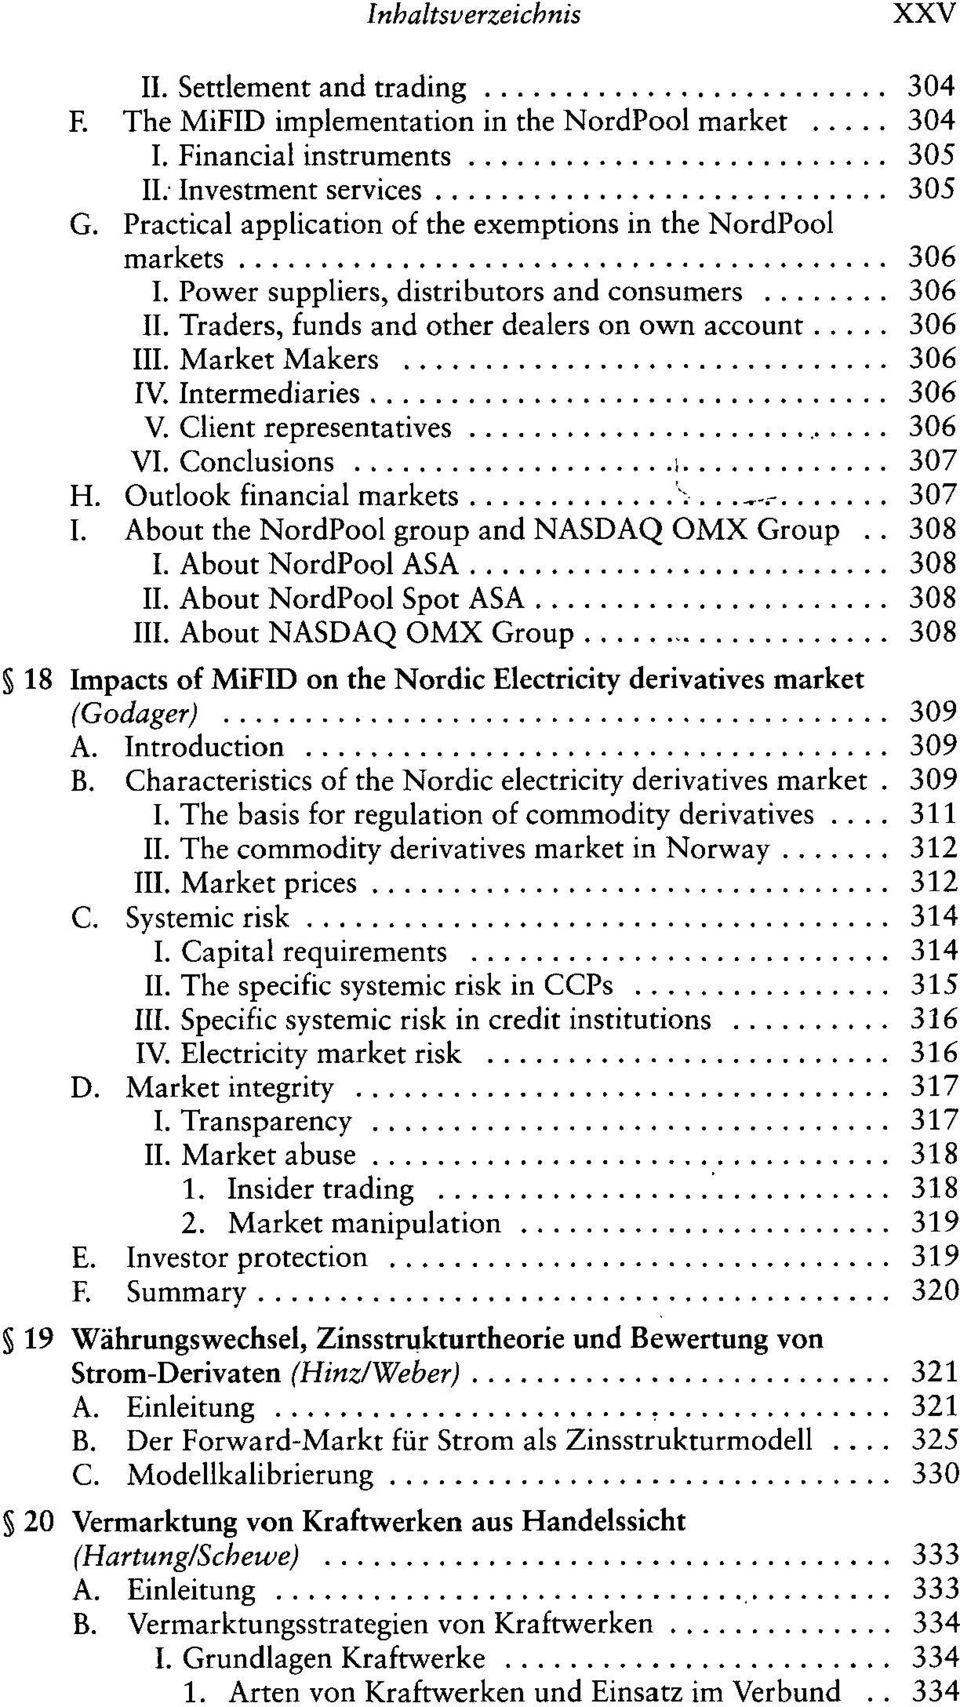 Market Makers 306 IV. Intermediaries 306 V. Client representatives 306 VI. Conclusions i 307 H. Outlook financial markets S... -.- 307 I. About the NordPool group and NASDAQ OMX Group.. 308 I.